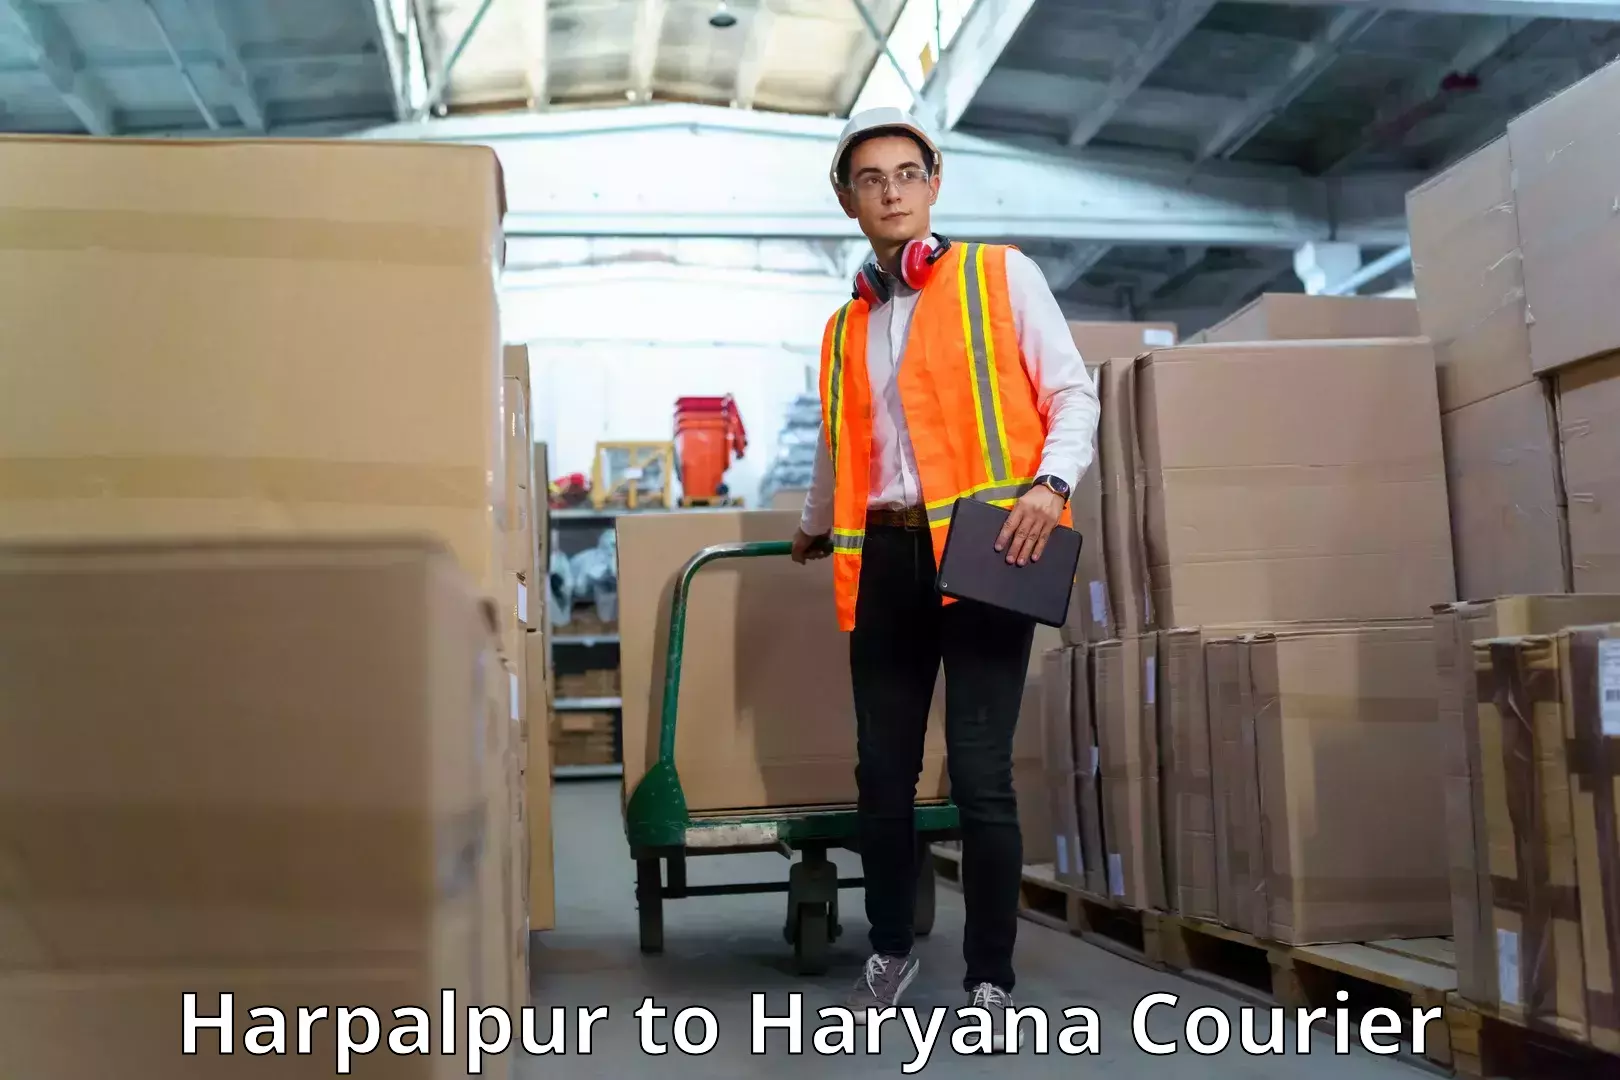 Express delivery capabilities Harpalpur to Ambala